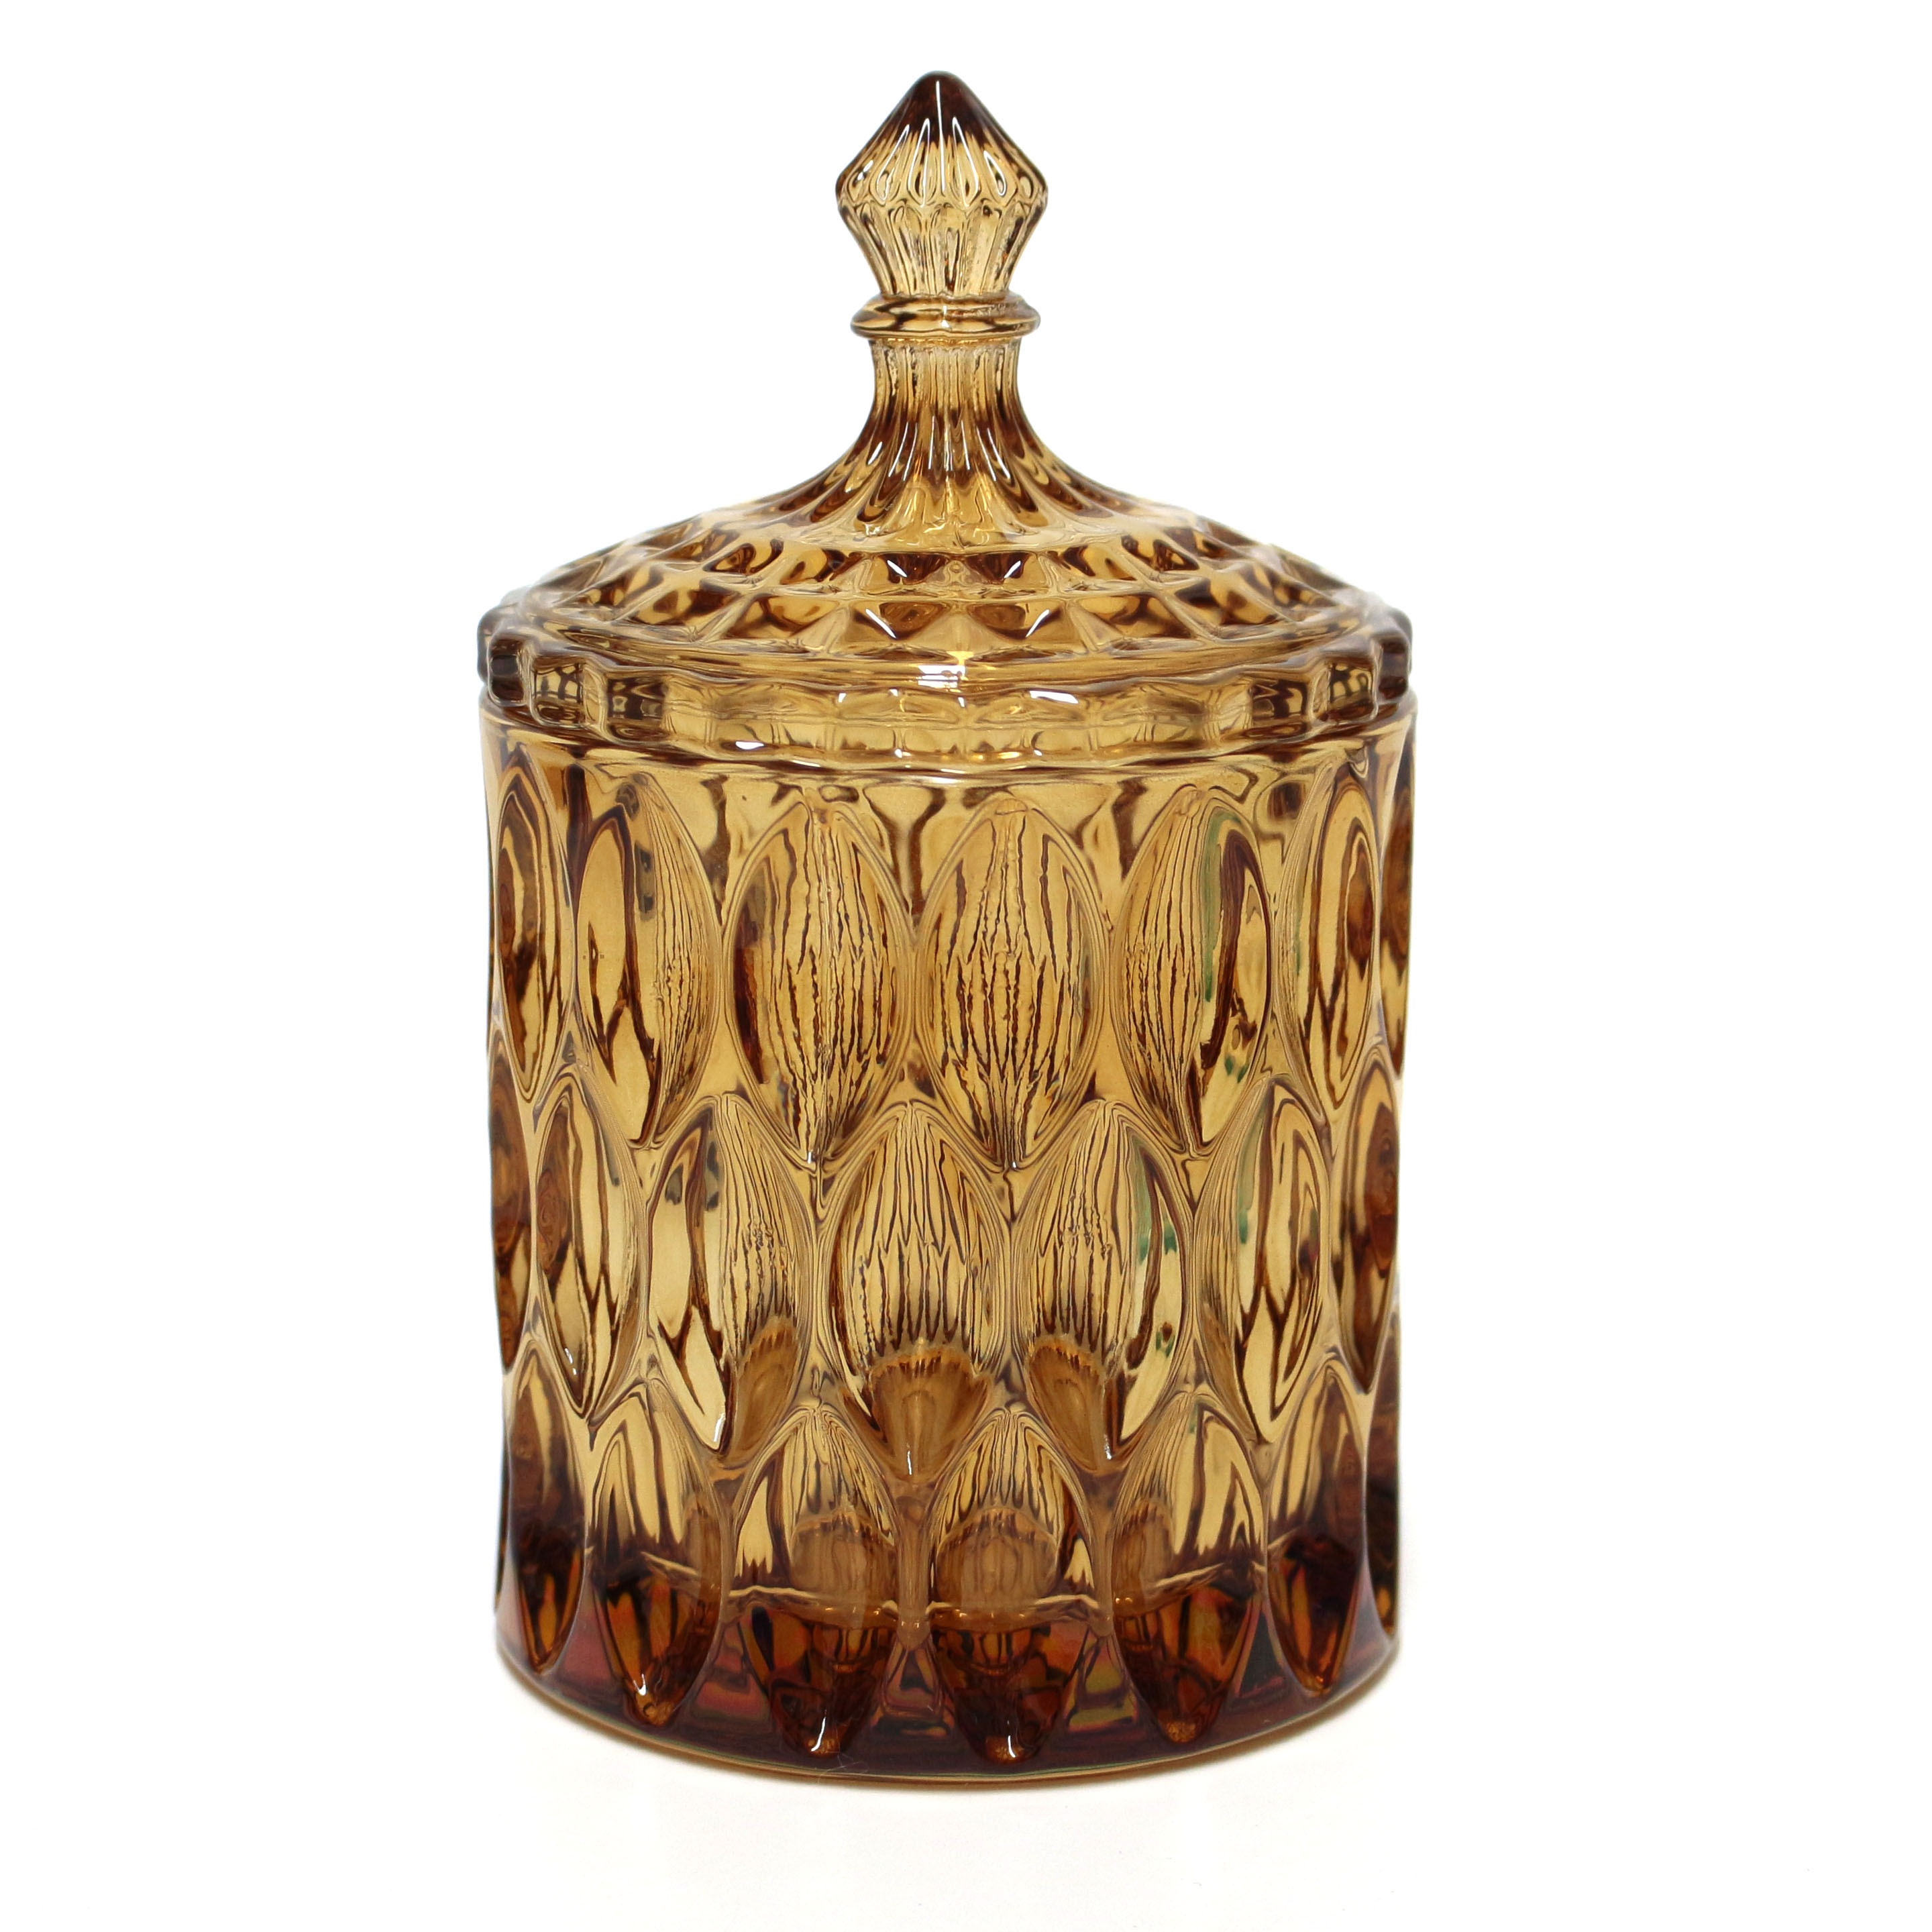 FENGJUN 2022 Popular luxury amber colored wholesale engraved glass jewel box candle holder with sharp lids for candle making